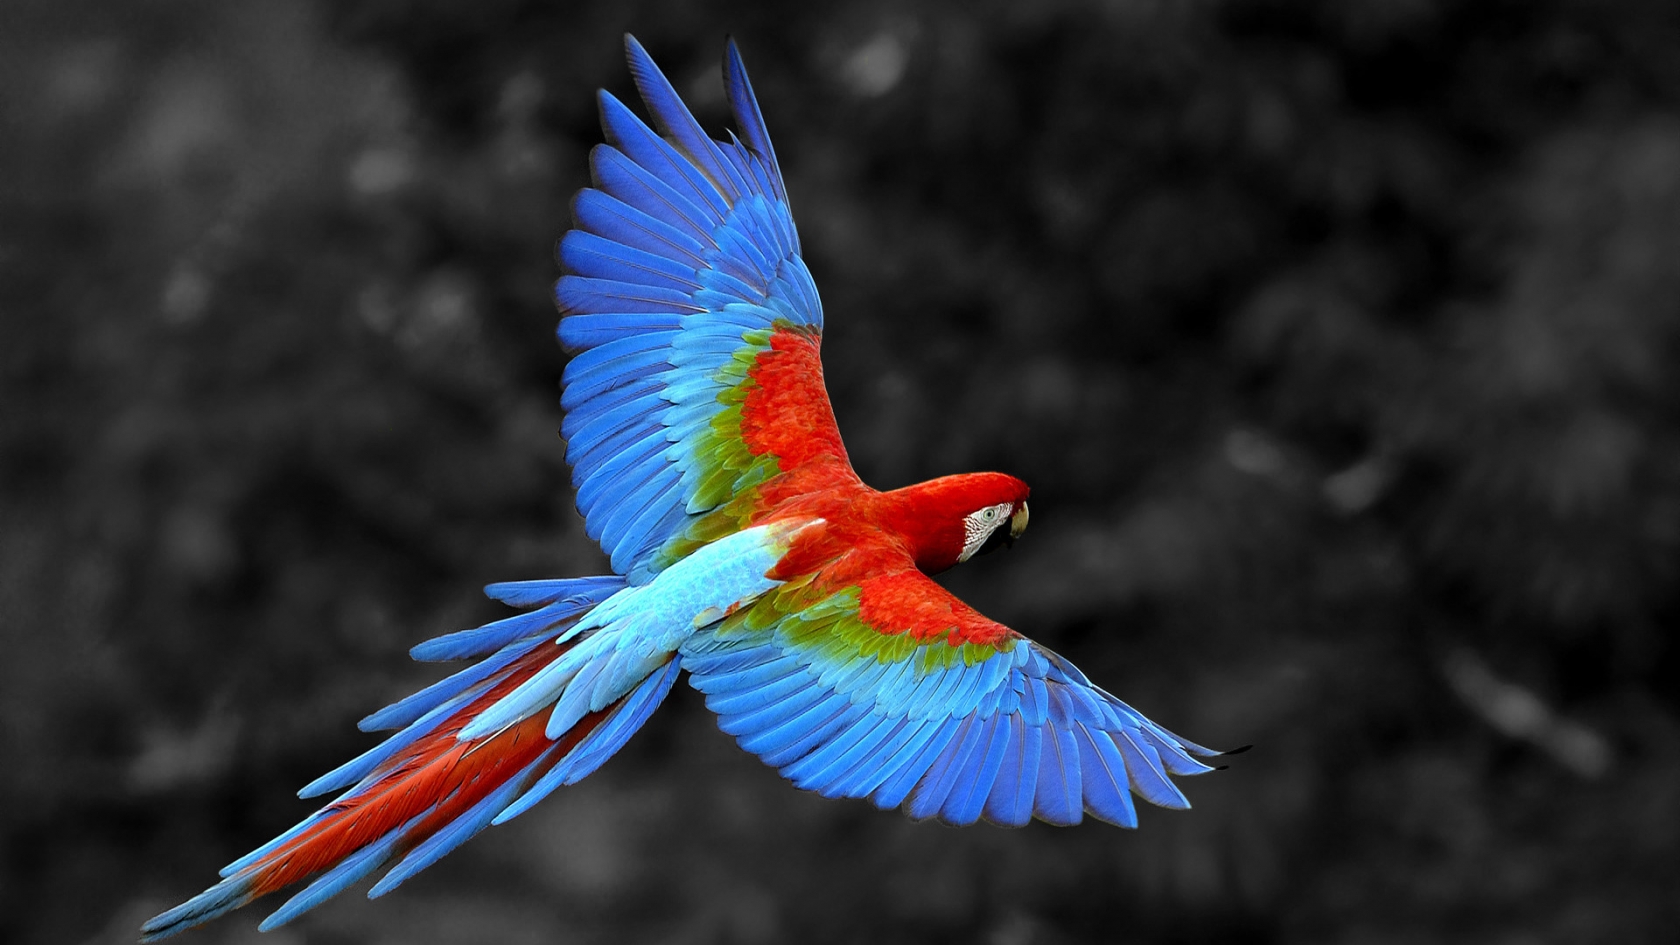 Great Colorful Parrot for 1680 x 945 HDTV resolution